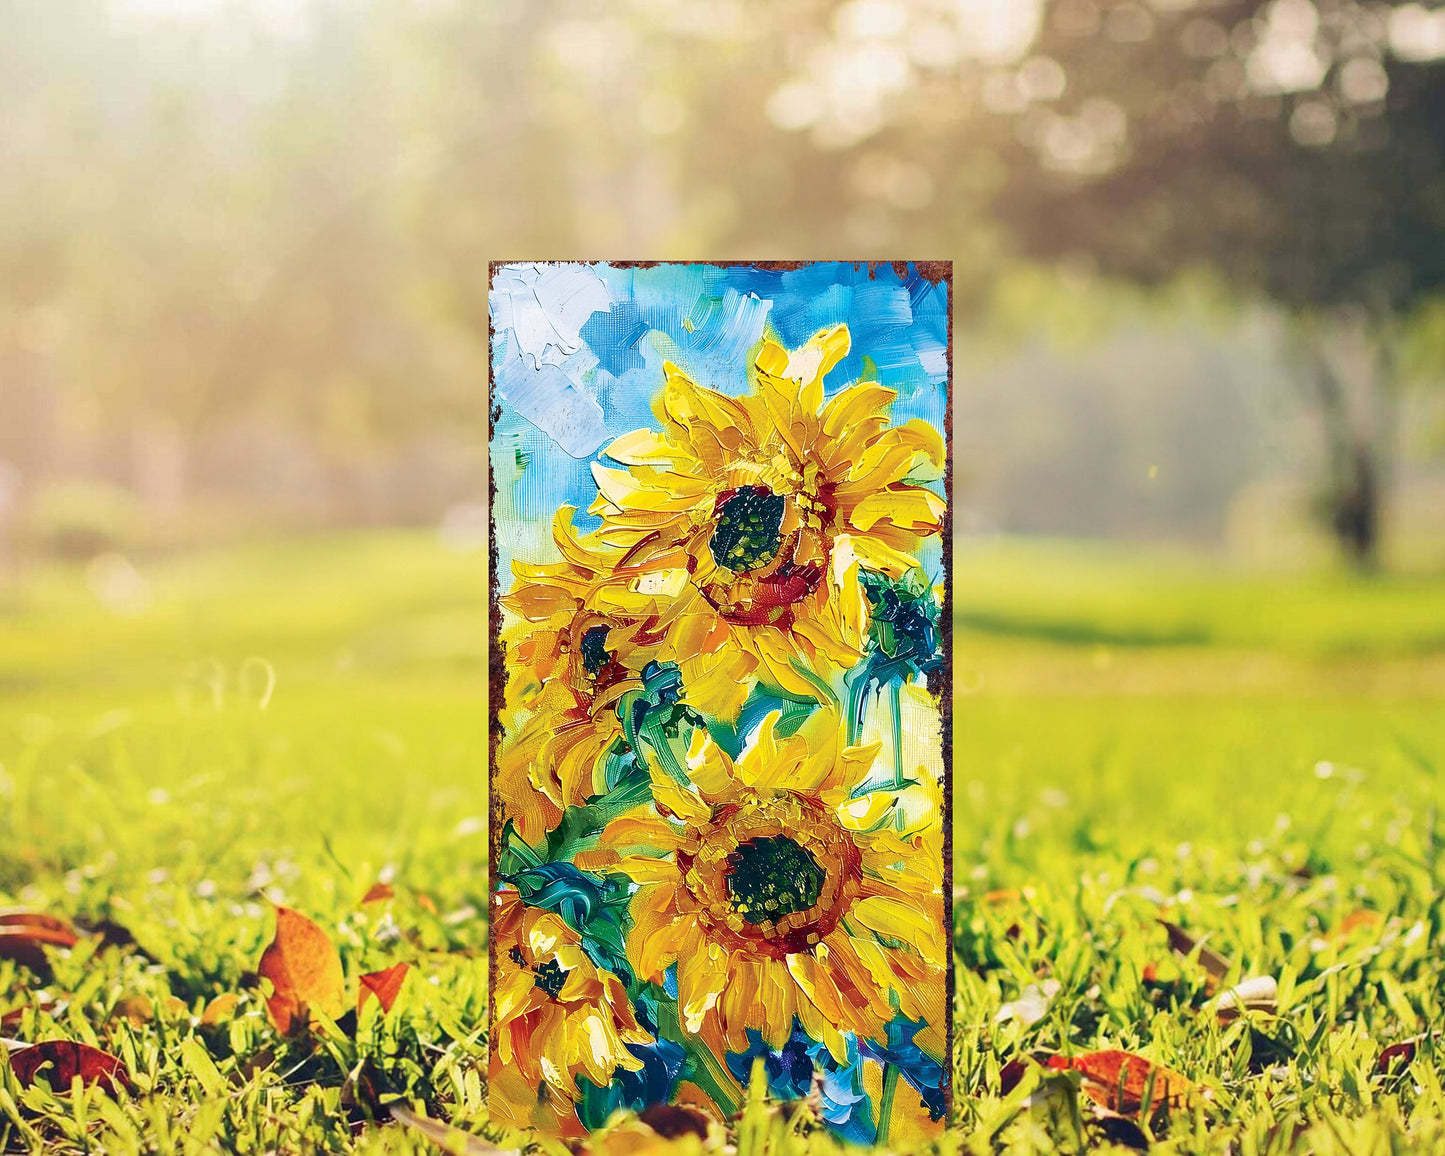 30in Summer Garden Stake - Oil Paint Style Sunflower Decor | Great for Outdoor Decor, Yard Art, and Garden Decoration